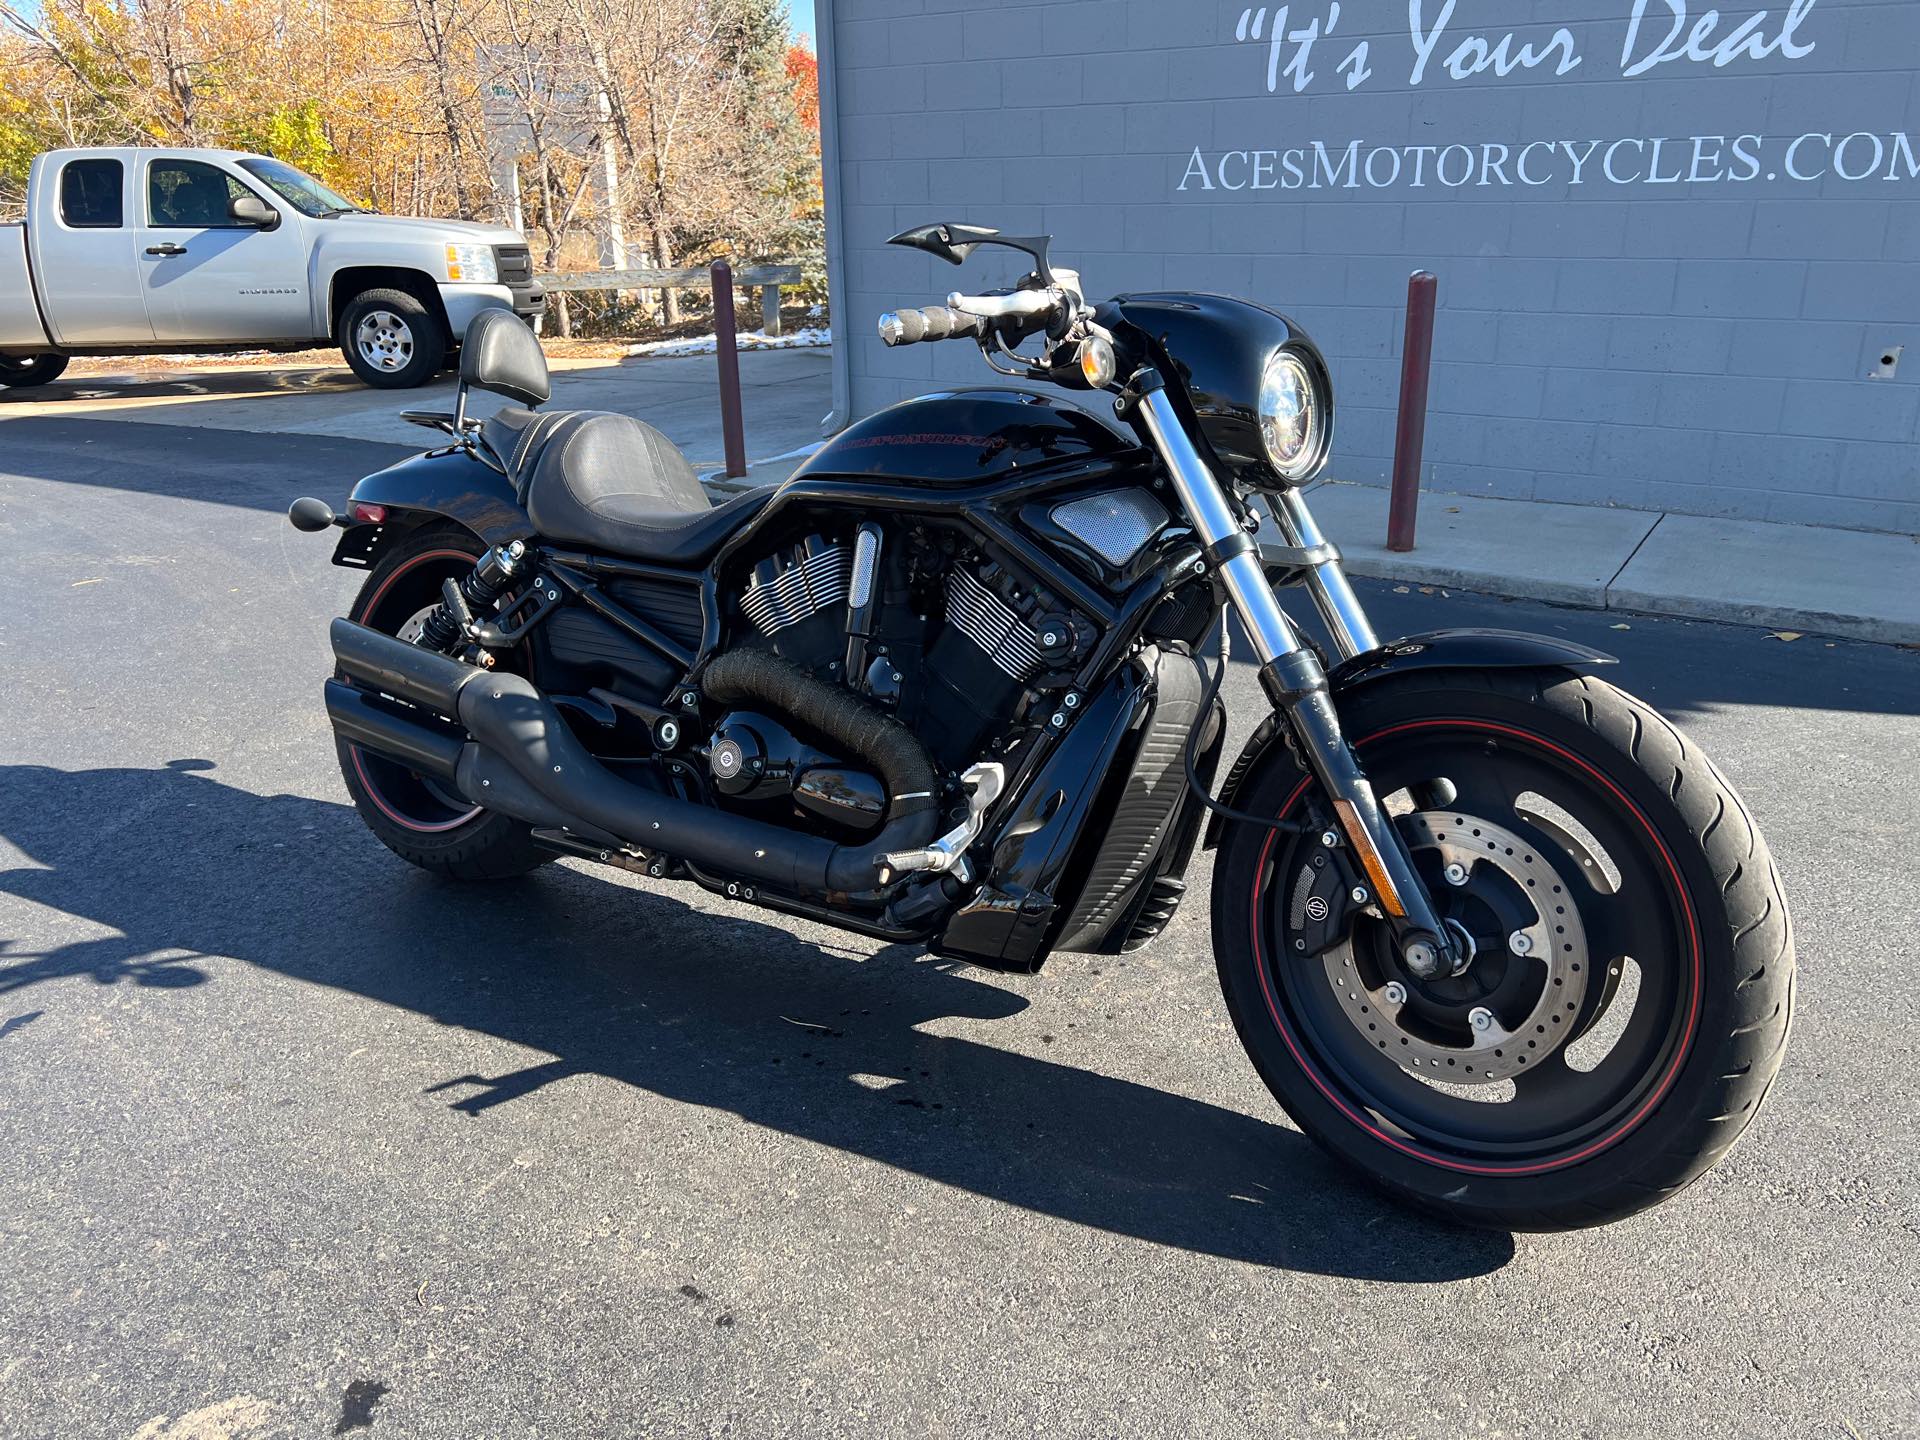 2007 Harley-Davidson VRSC Night Rod Special at Aces Motorcycles - Fort Collins